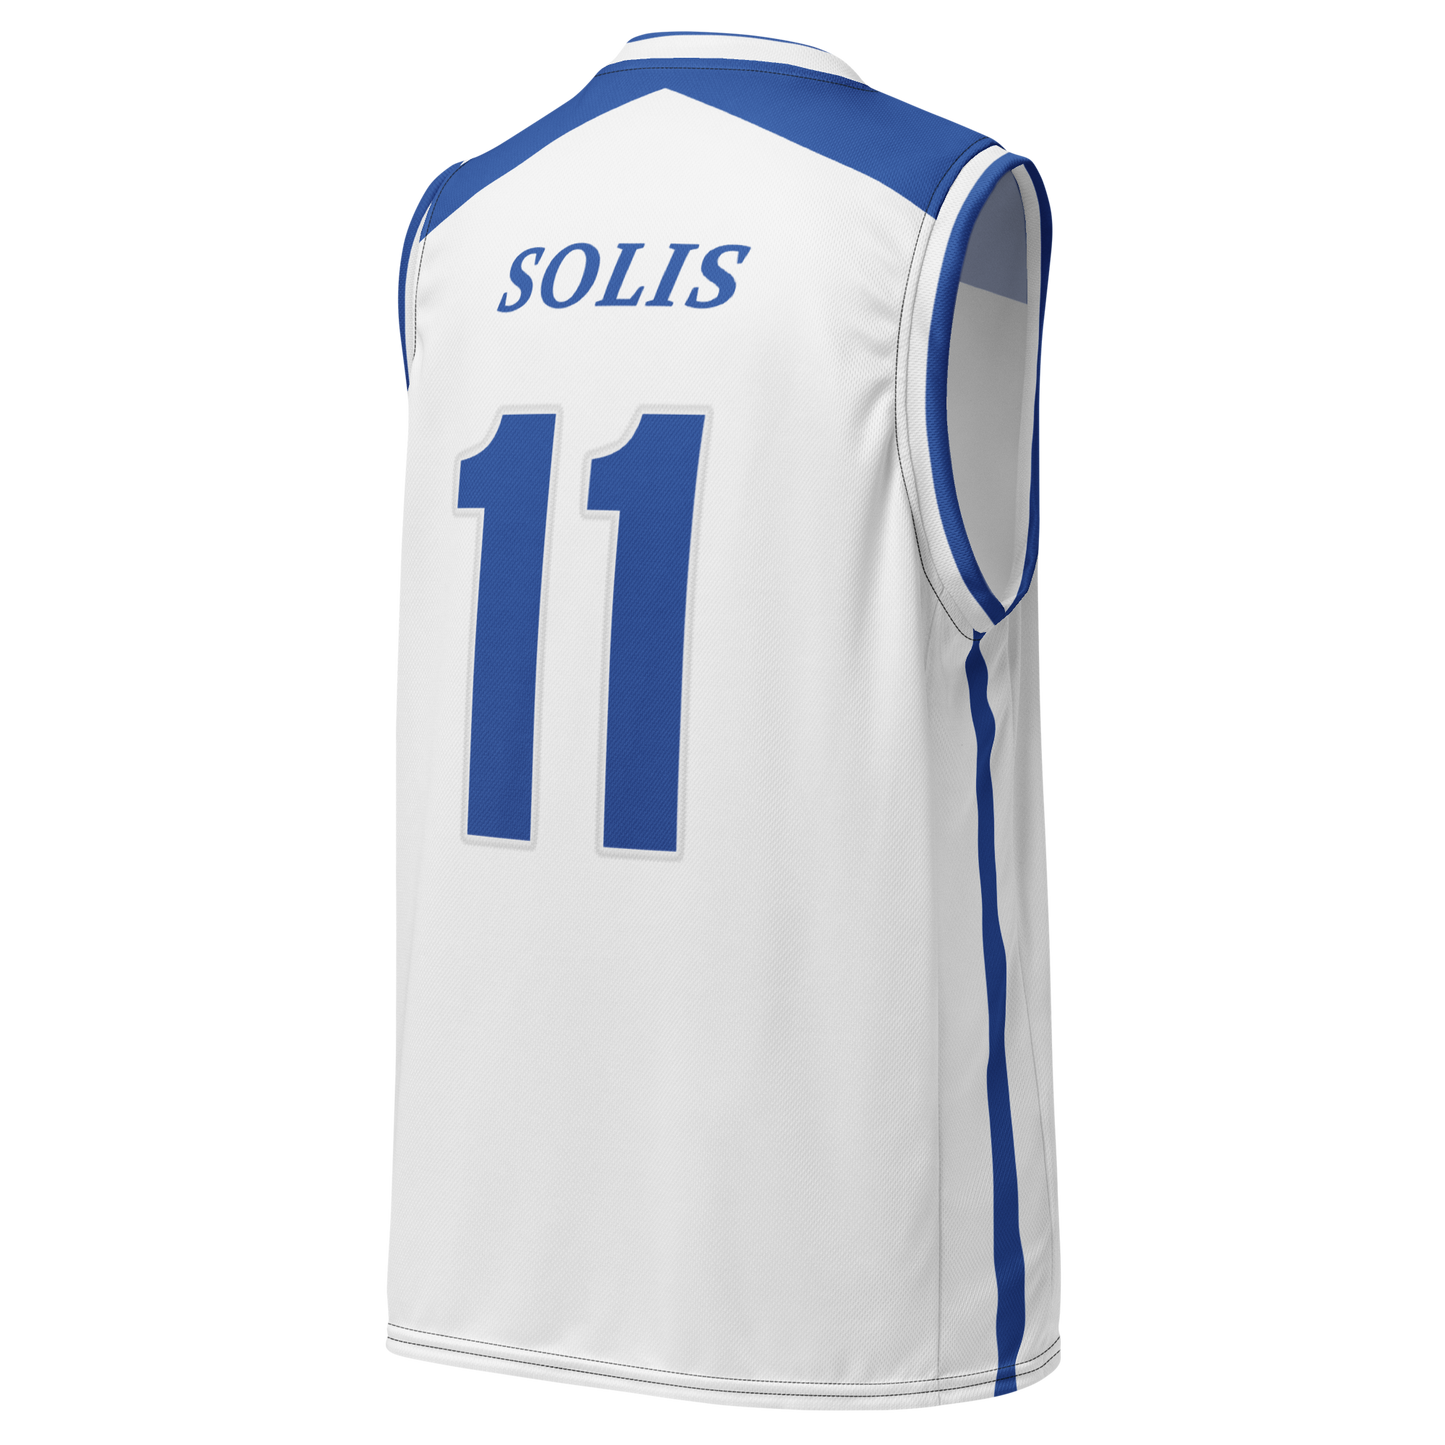 Edwin Solis | Game Day Jersey